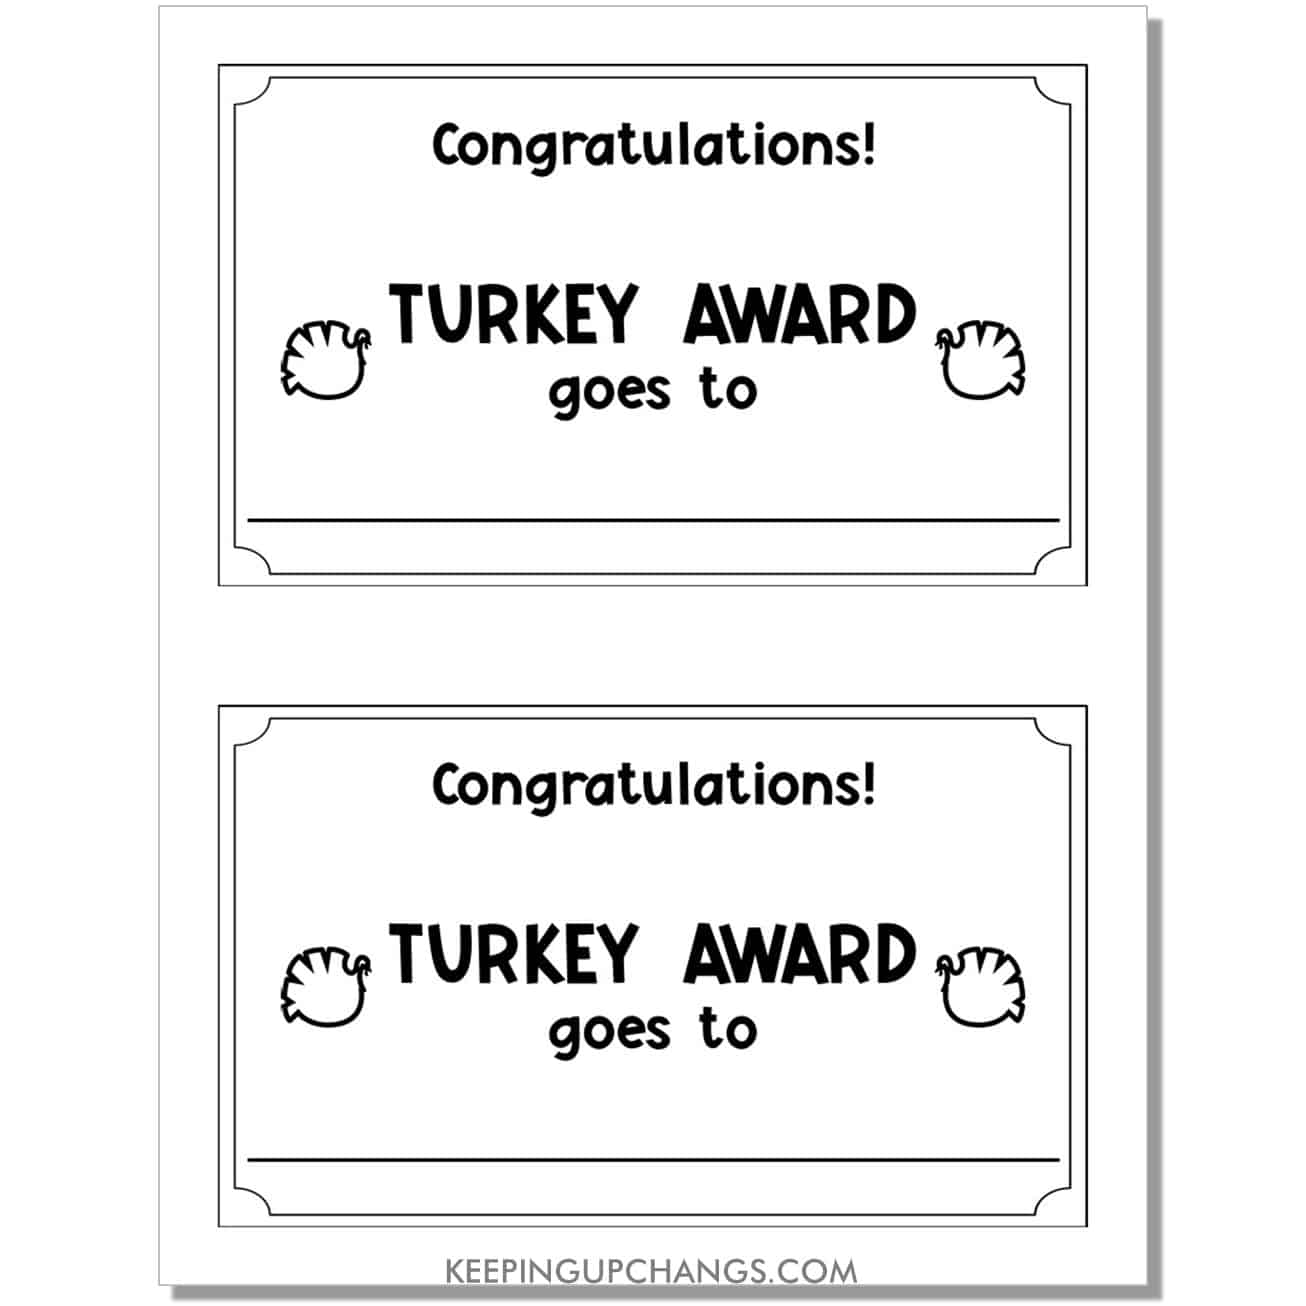 blank turkey disguise project award printable in editable pdf.